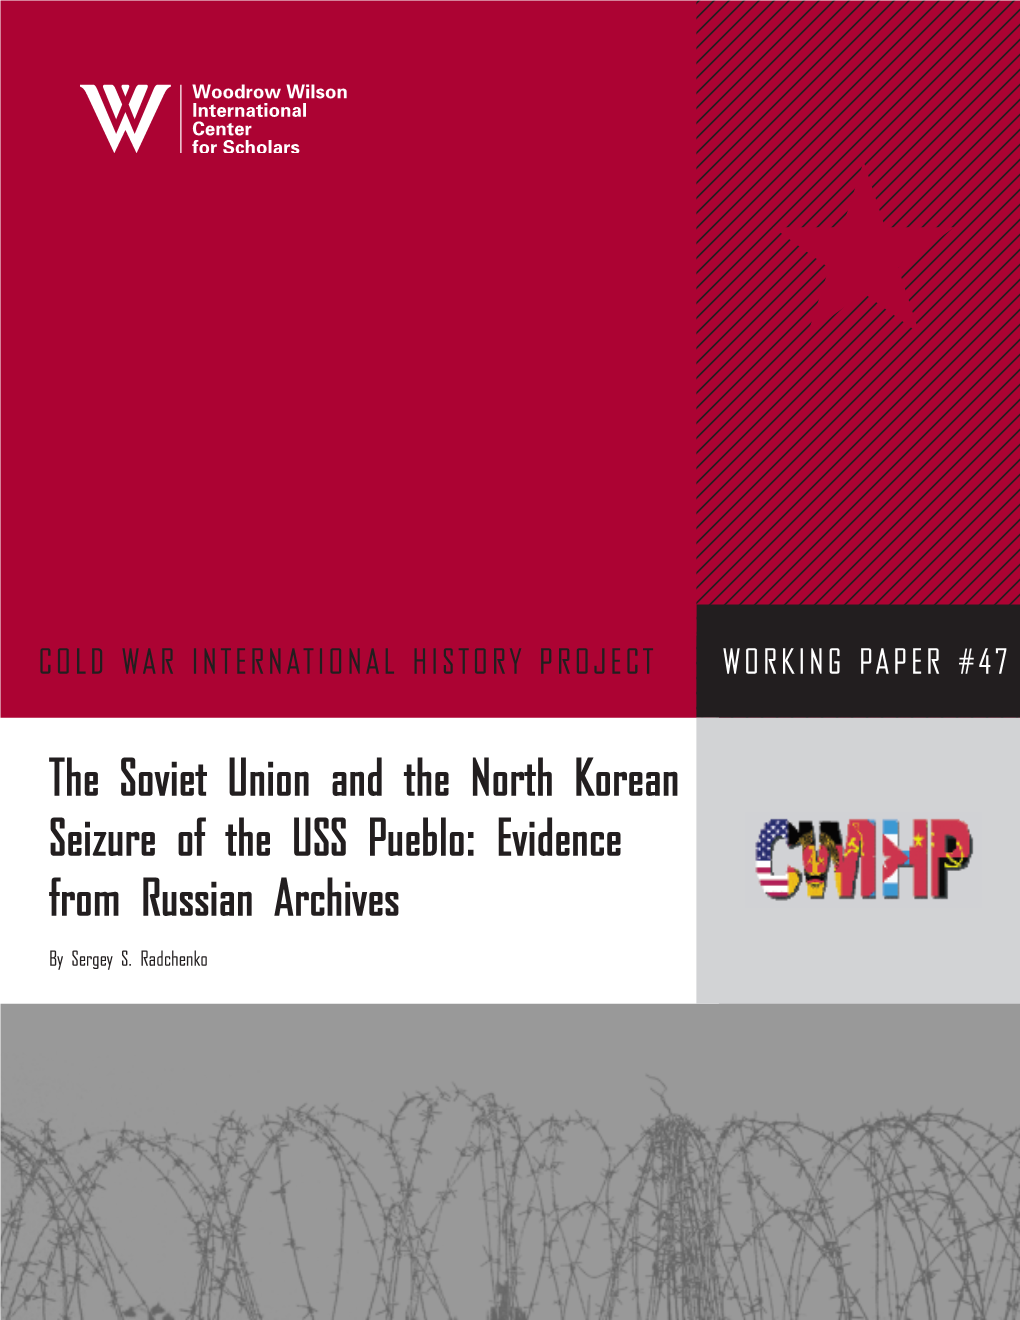 The Soviet Union and the North Korean Seizure of the USS Pueblo: Evidence from Russian Archives